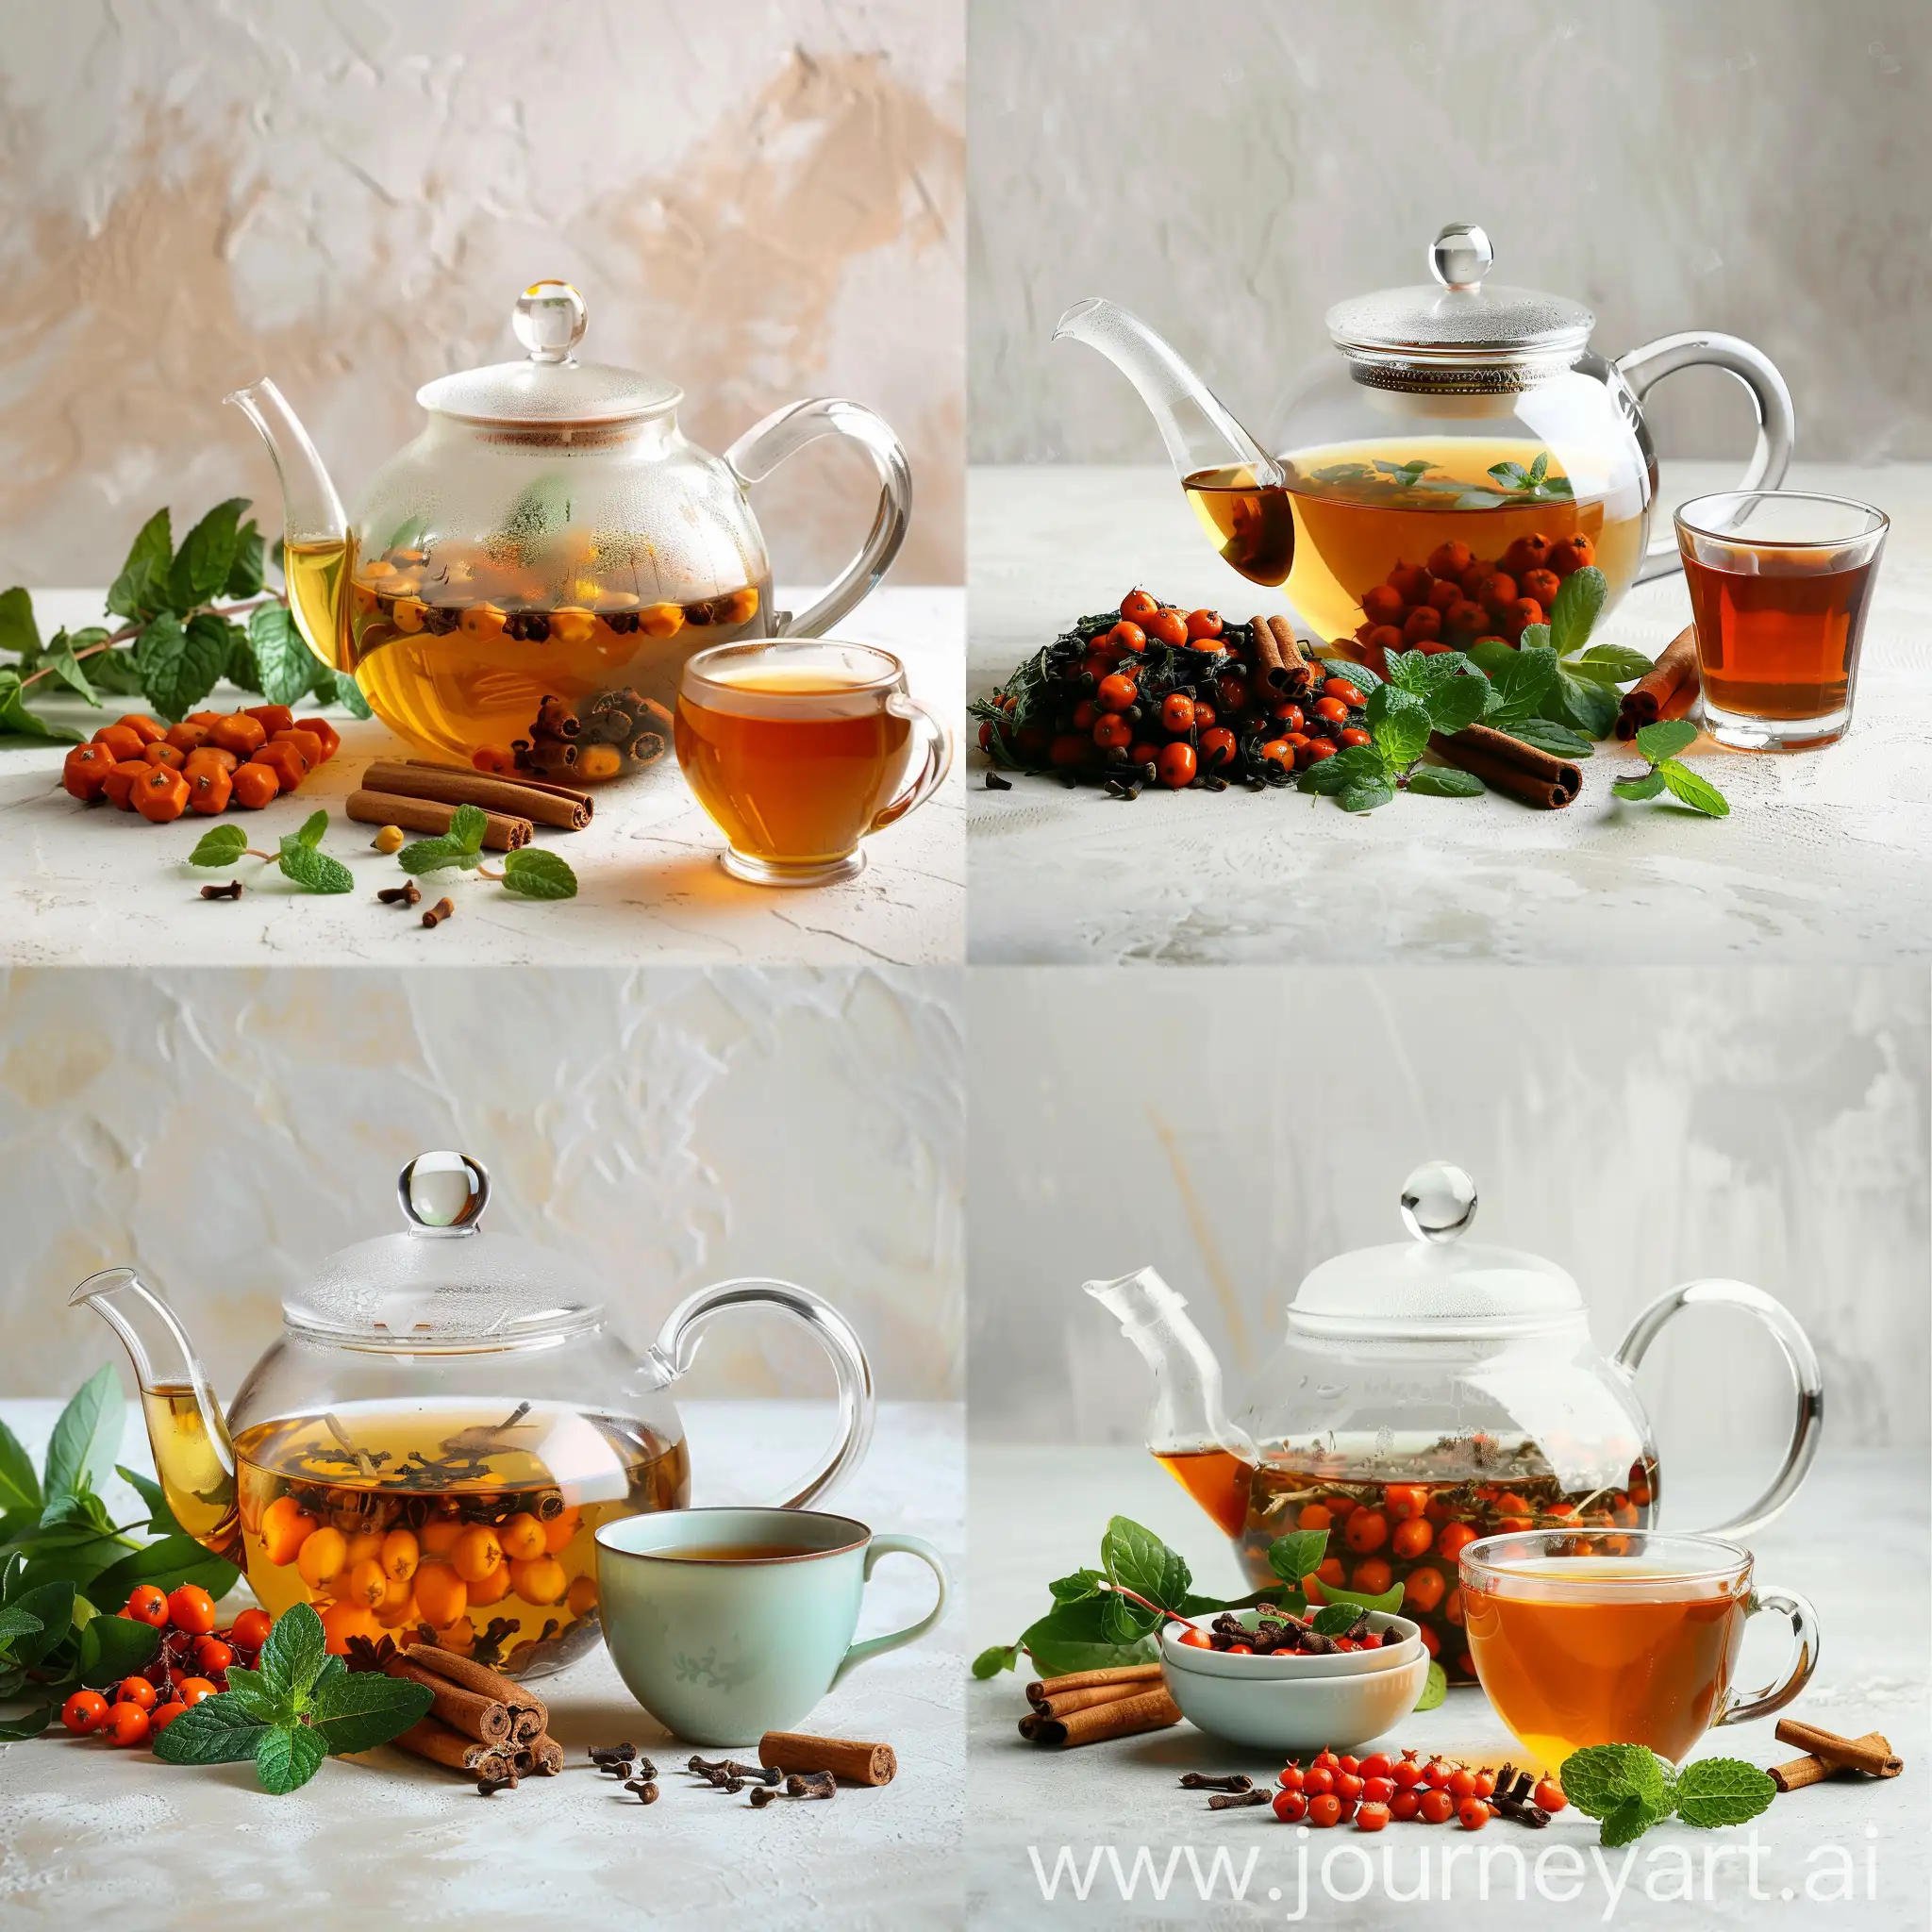 Transparent-Teapot-with-Sea-Buckthorn-Tea-and-Fresh-Mint-on-Light-Background